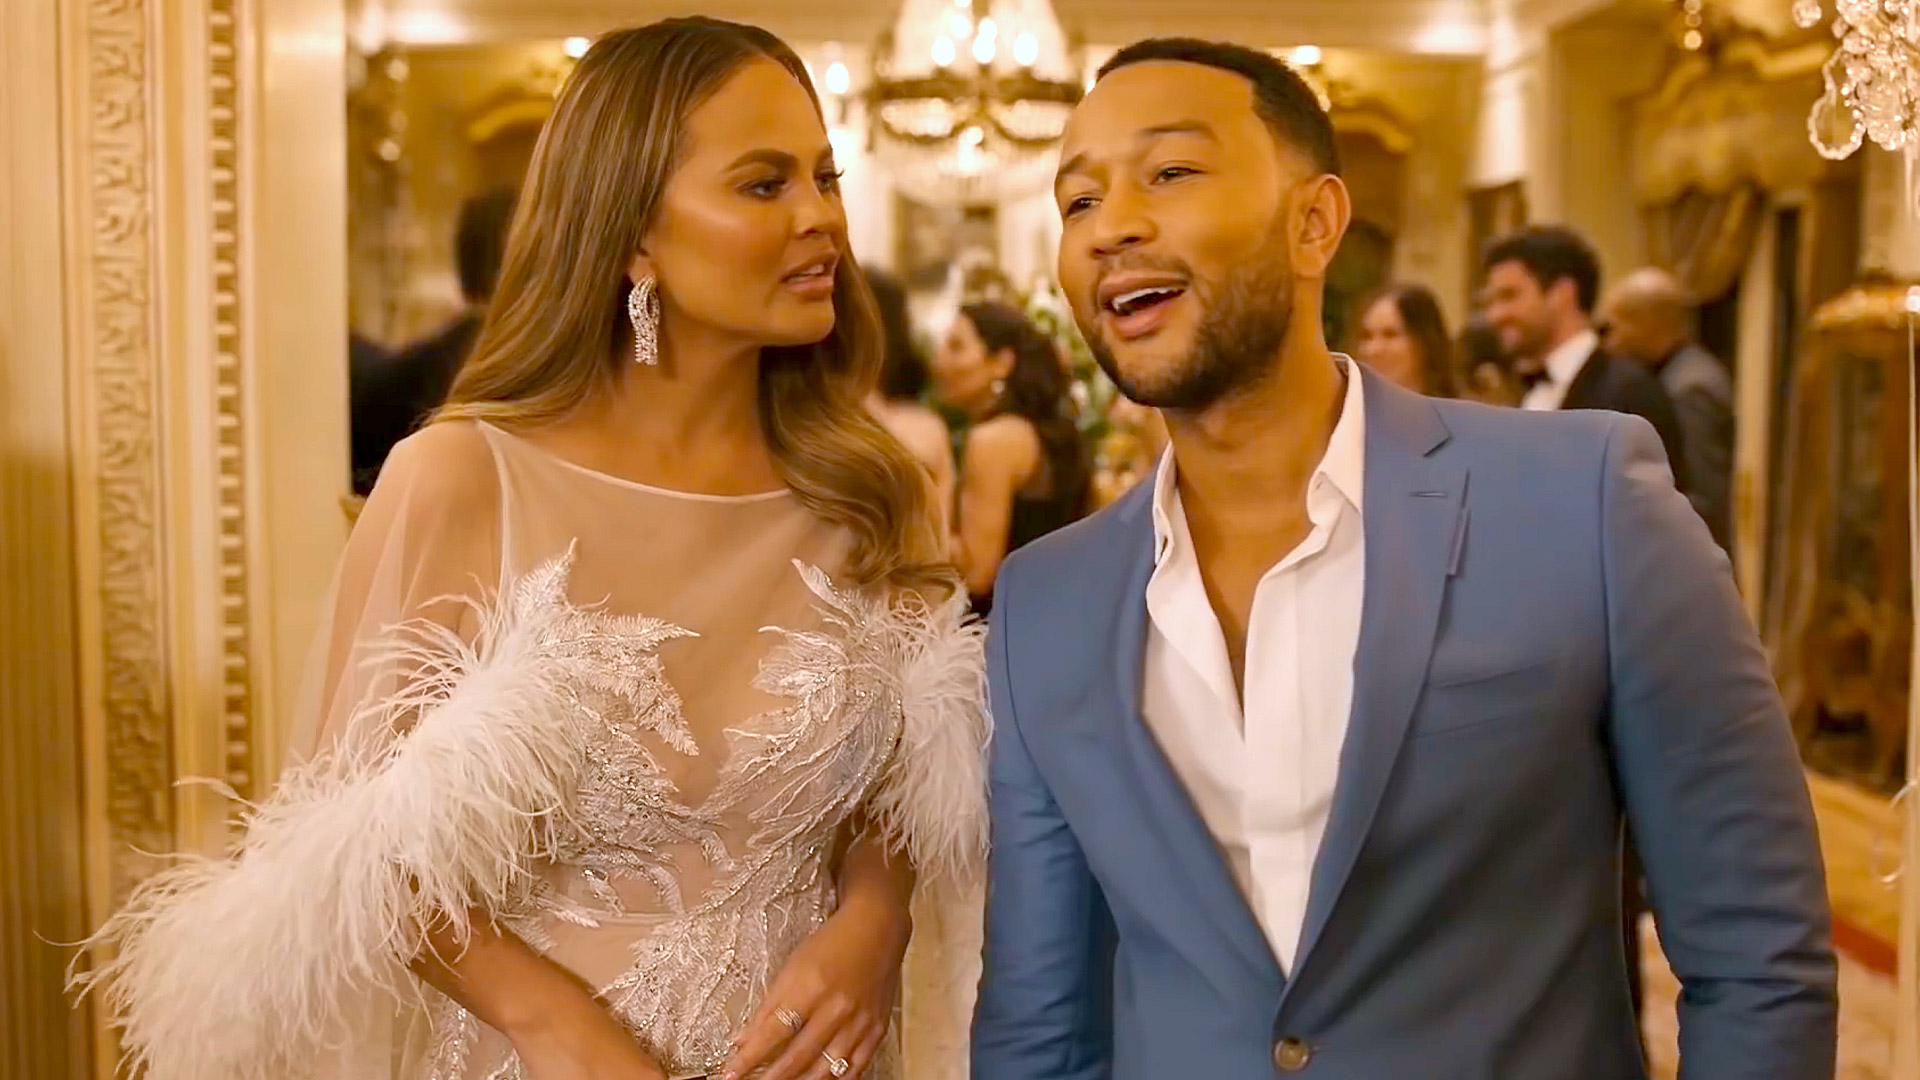 Genesis "Going Away Party" Super Bowl Commercial 2020 with John Legend and Chrissy Teigen